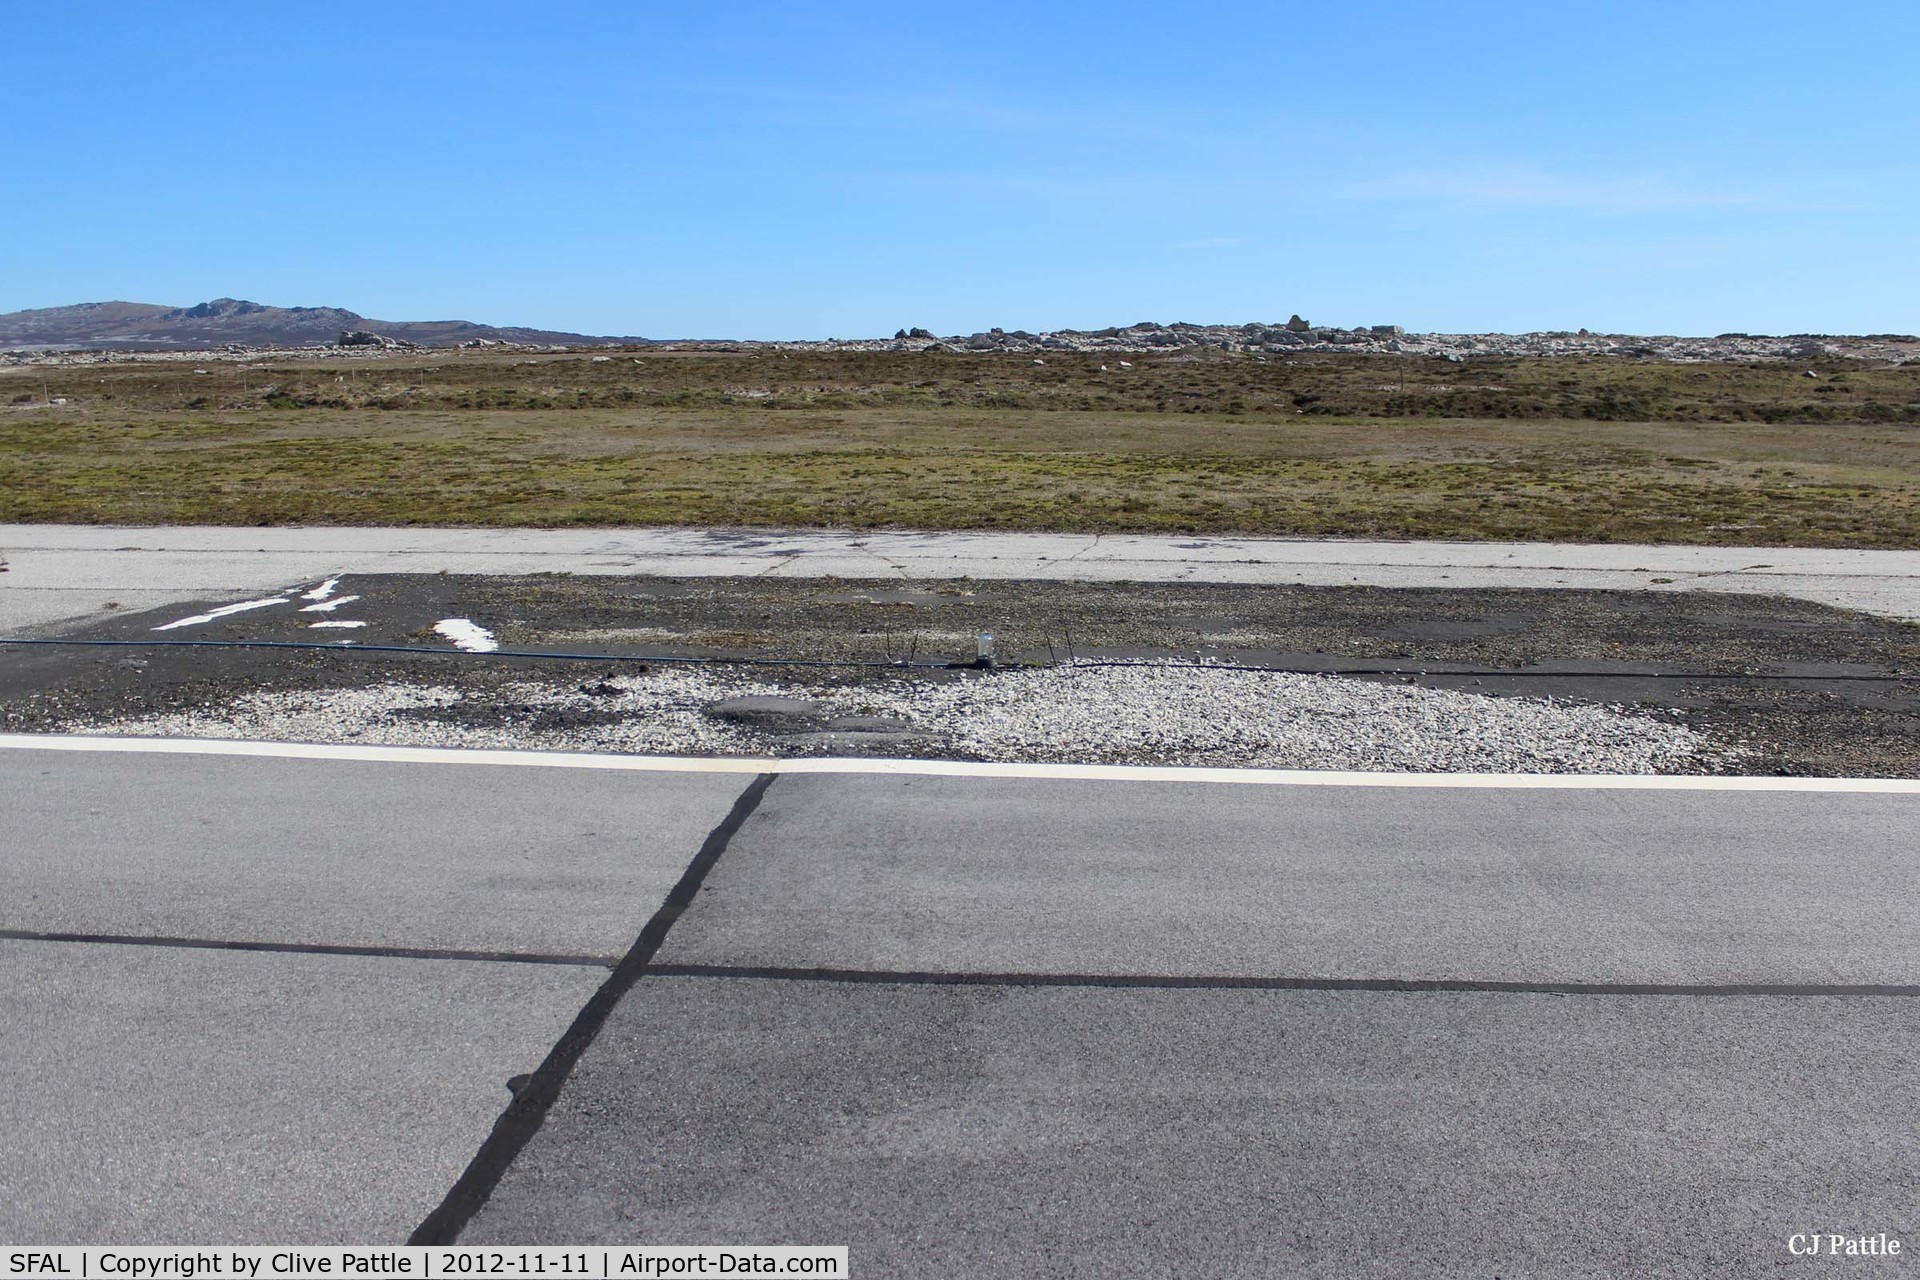 SFAL Airport - A darkened area of tarmac on the edge of the main runway at Port Stanley (SFAL) shows where repairs were made following the Vulcan Black Buck bombing sortie in May 1982. 